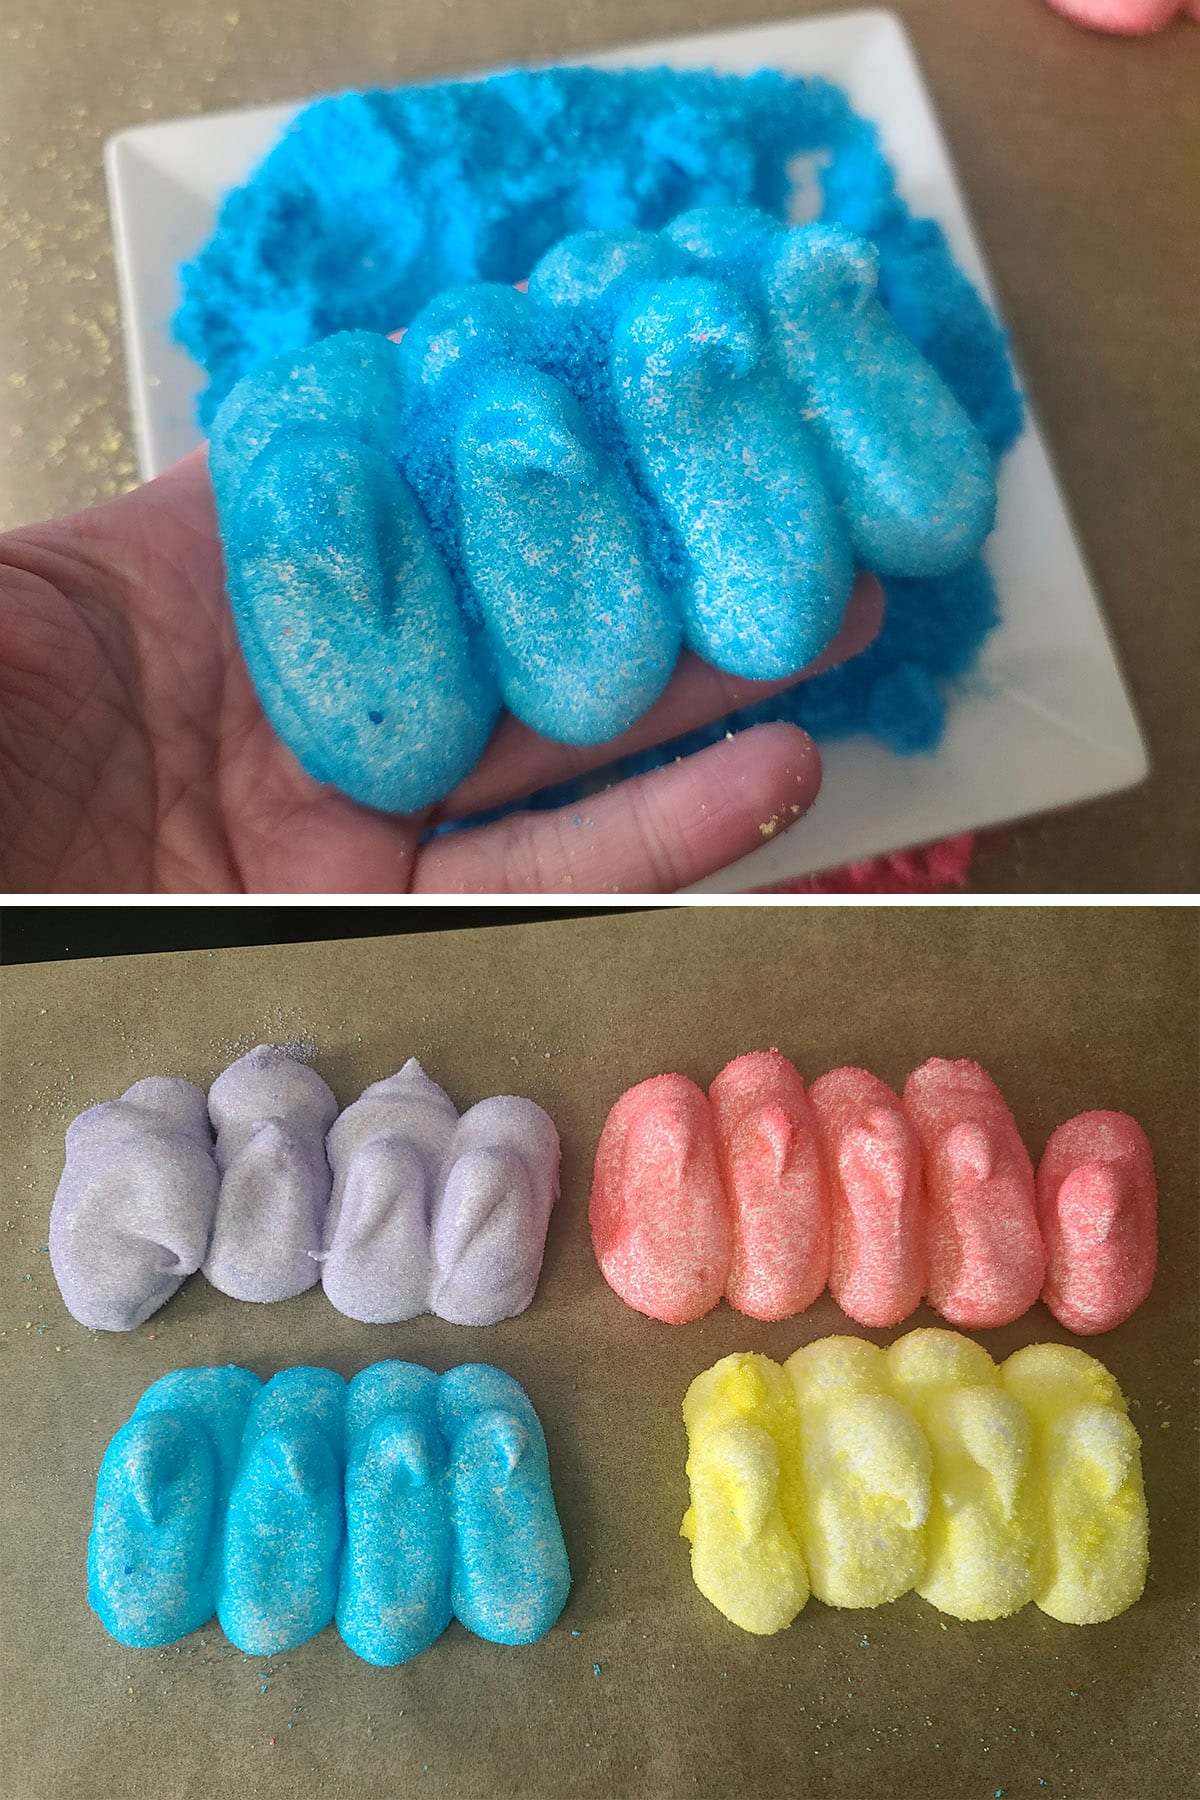 A hand holds up a line of blue homemade peeps, and the finished purple, pink, blue, and yellow peeps on a tray.